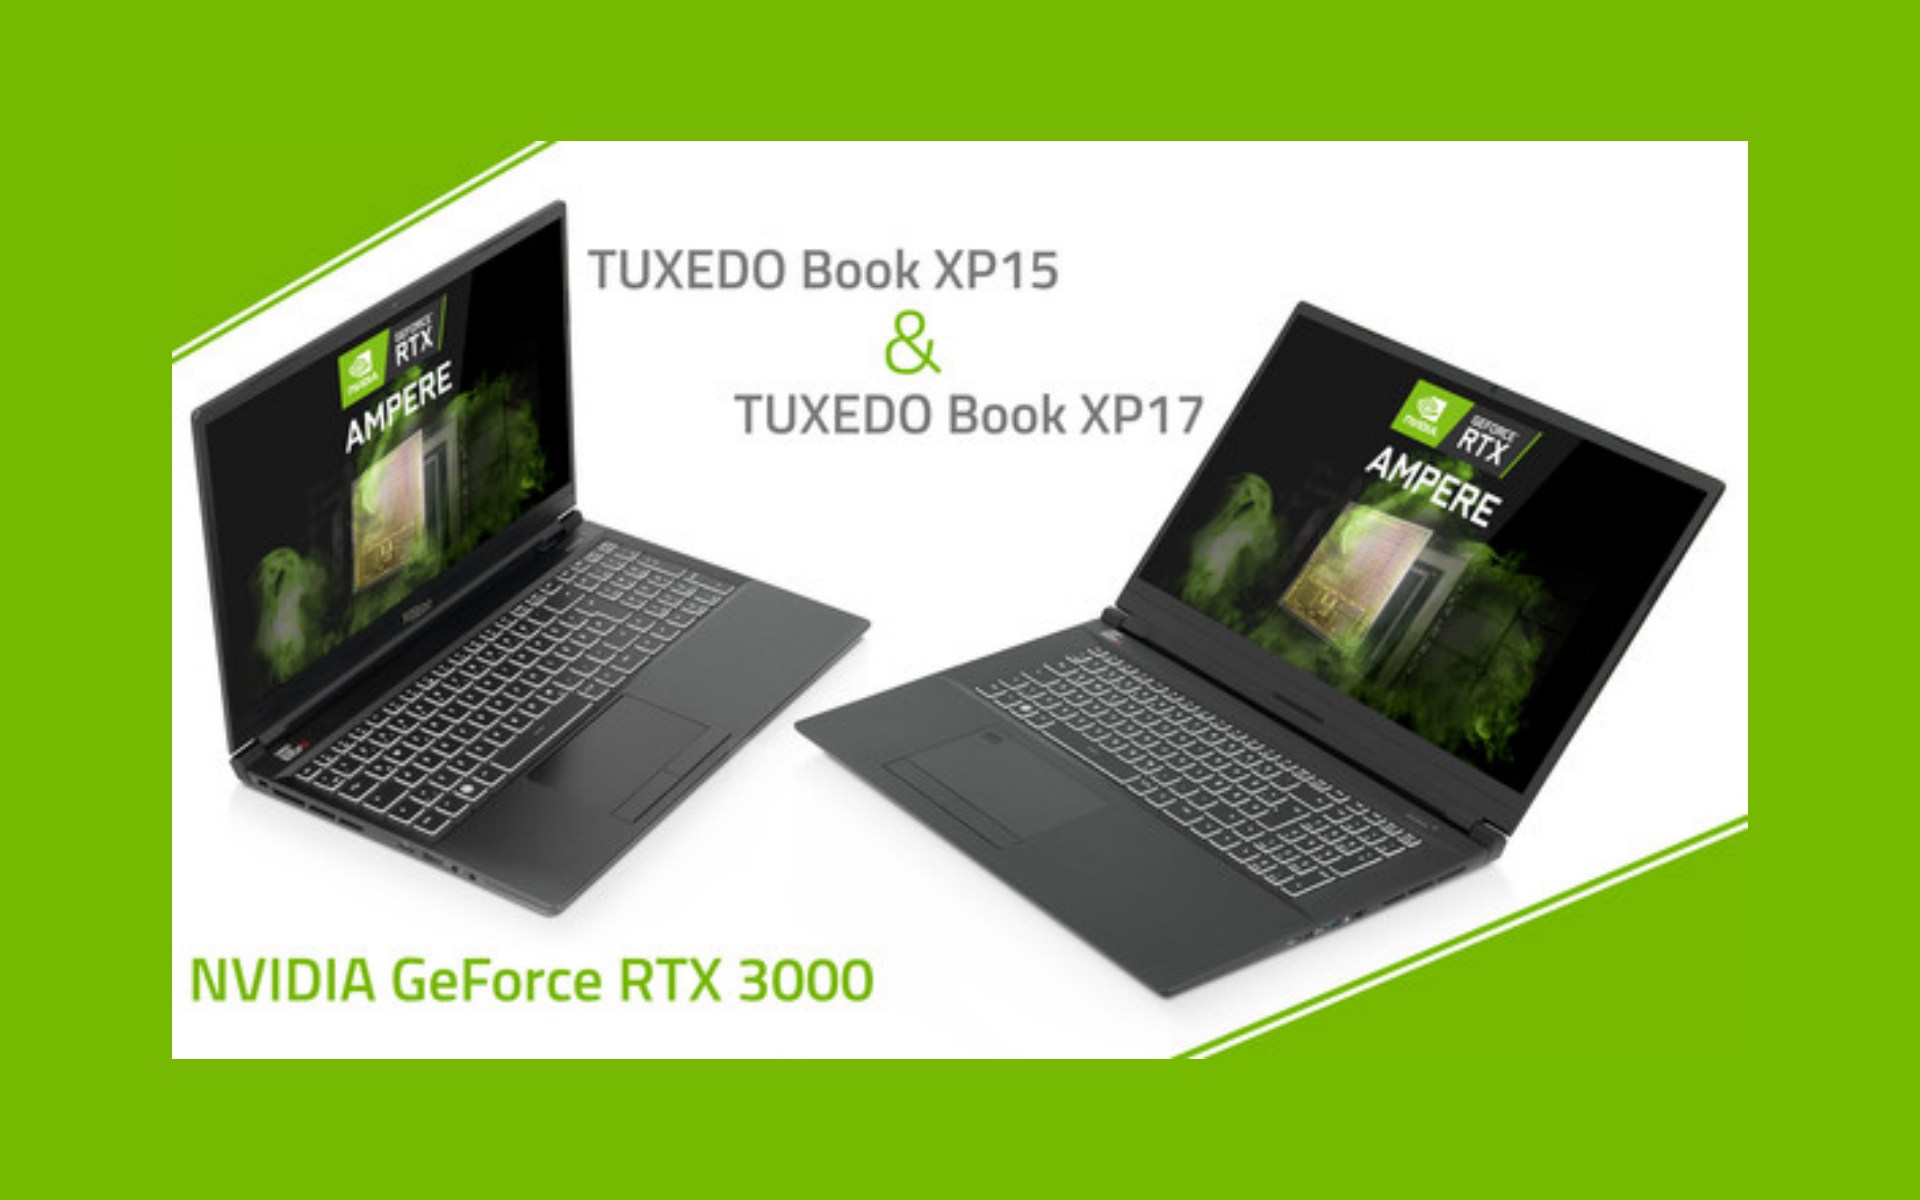 TUXEDO Computers Launches First Linux Gaming Laptops with NVIDIA GeForce RTX 3000